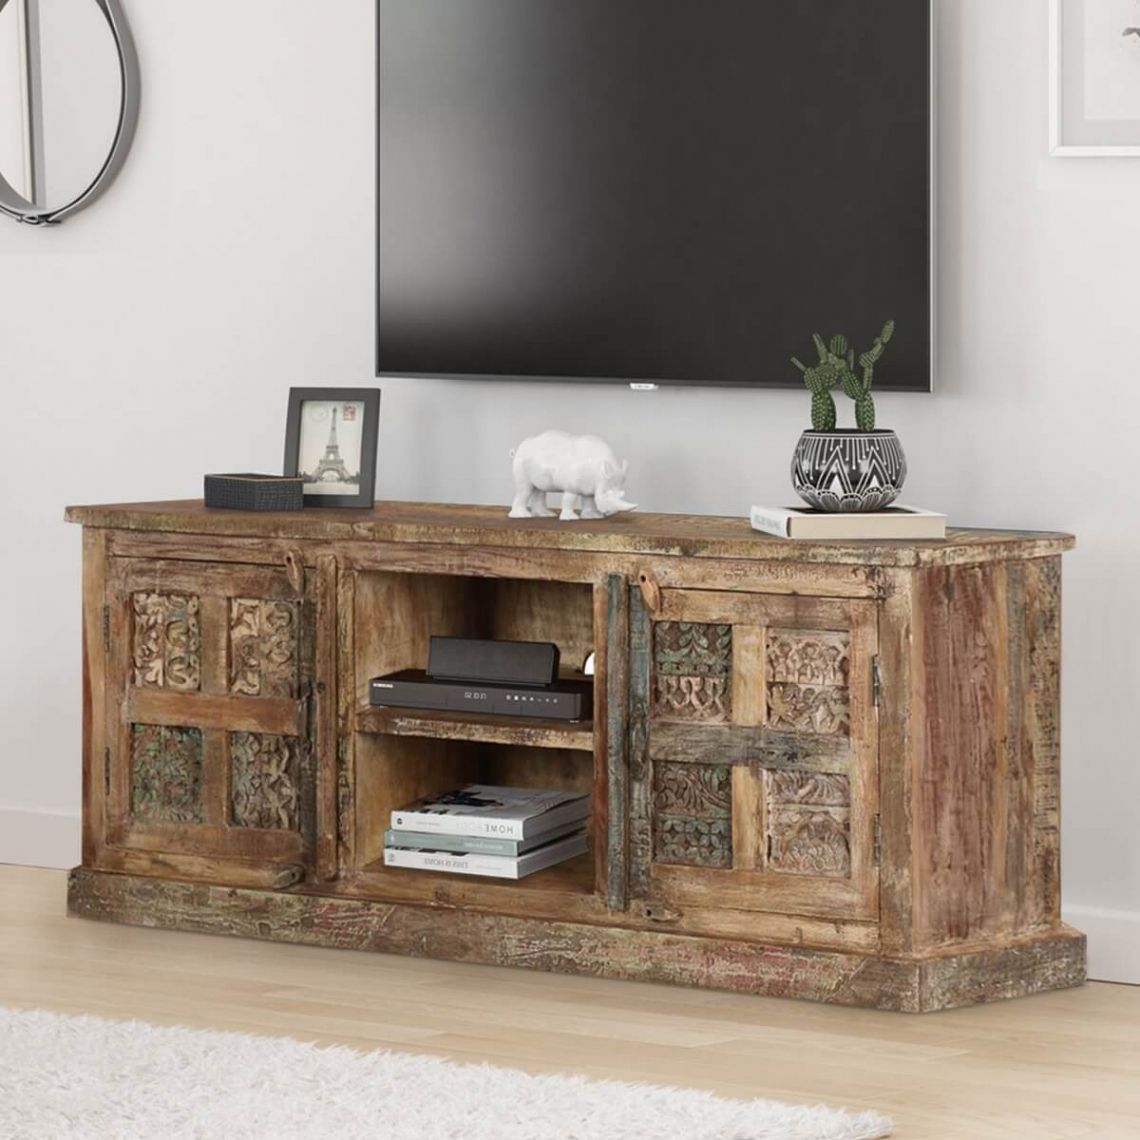 Lovely Distressed Wood Tv Stand | Ch20 Webmaster With Regard To Wooden Tv Stands (Photo 10 of 15)